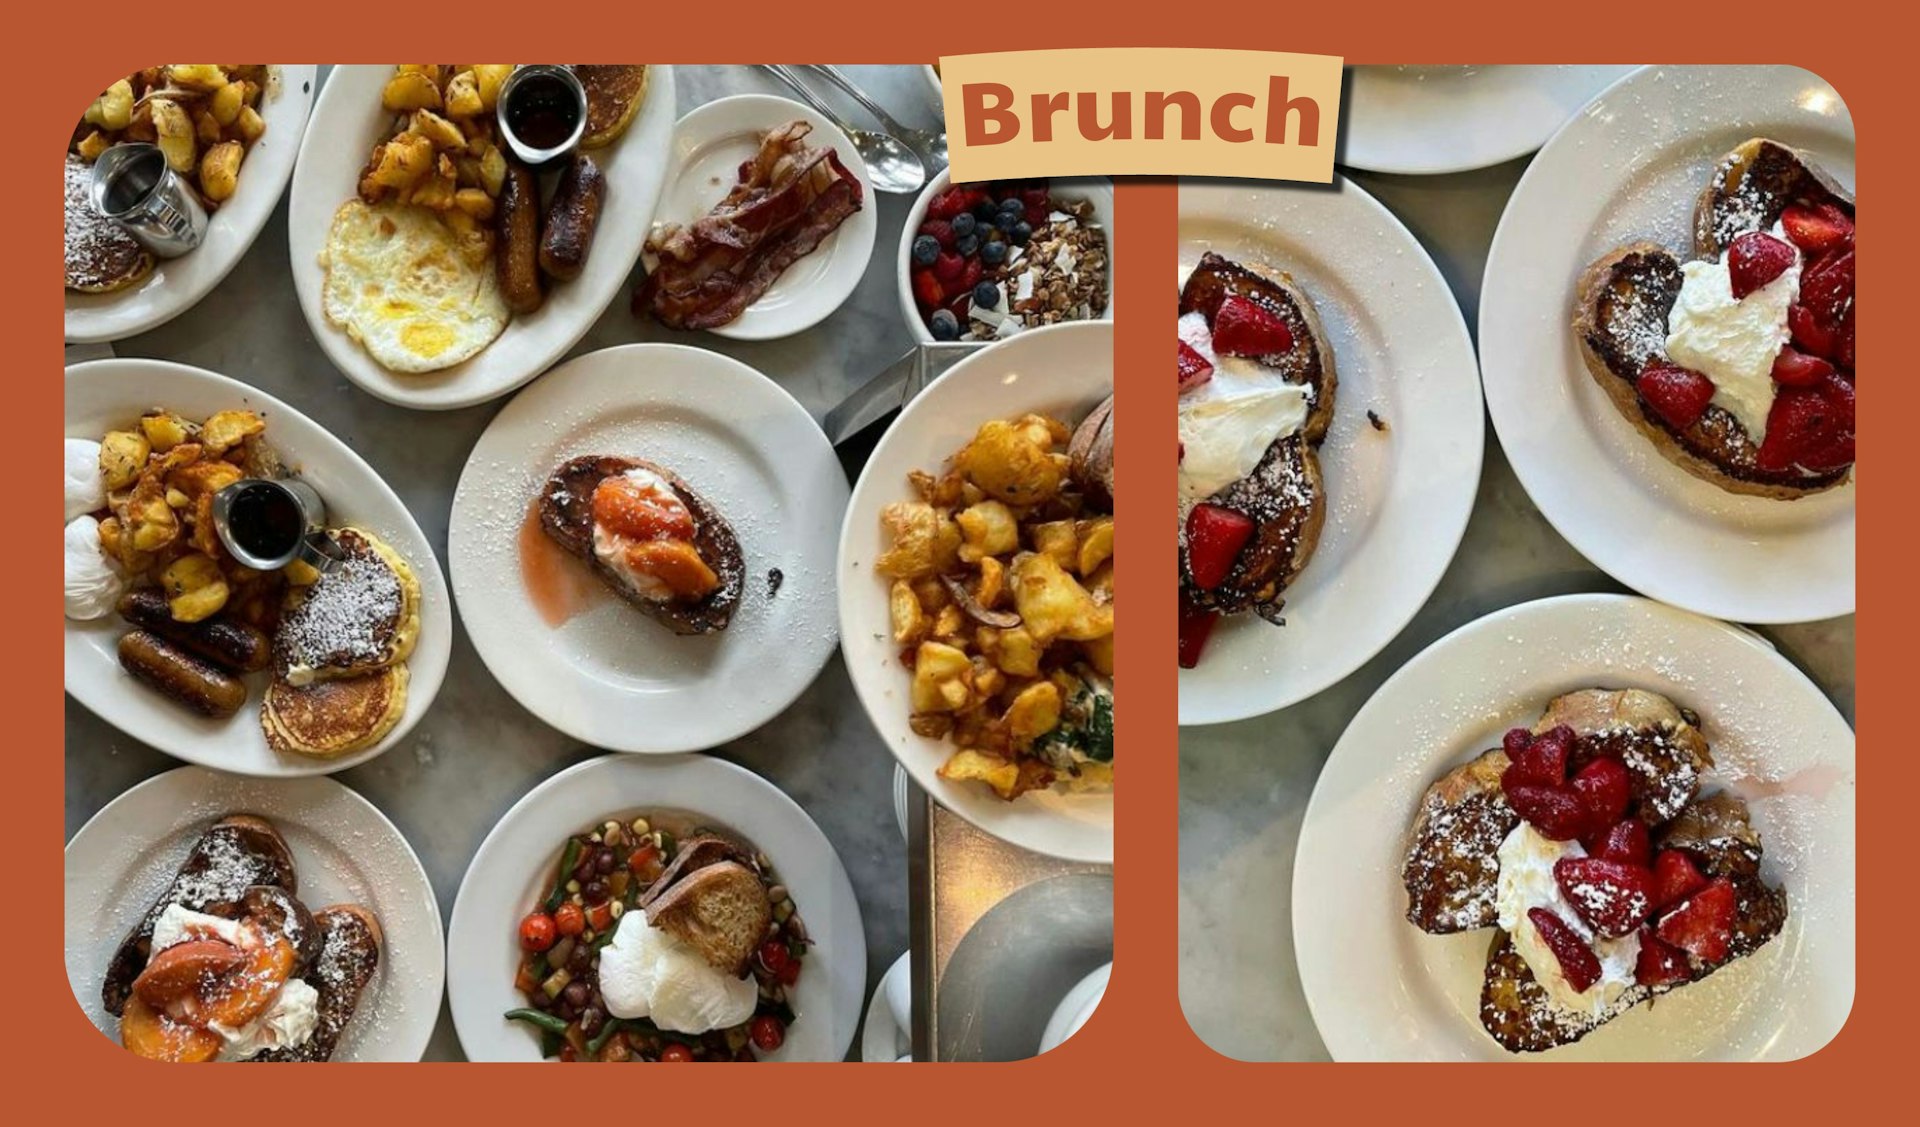 L: French toast topped with raspberries. R: Spread of plates on a table with brunches